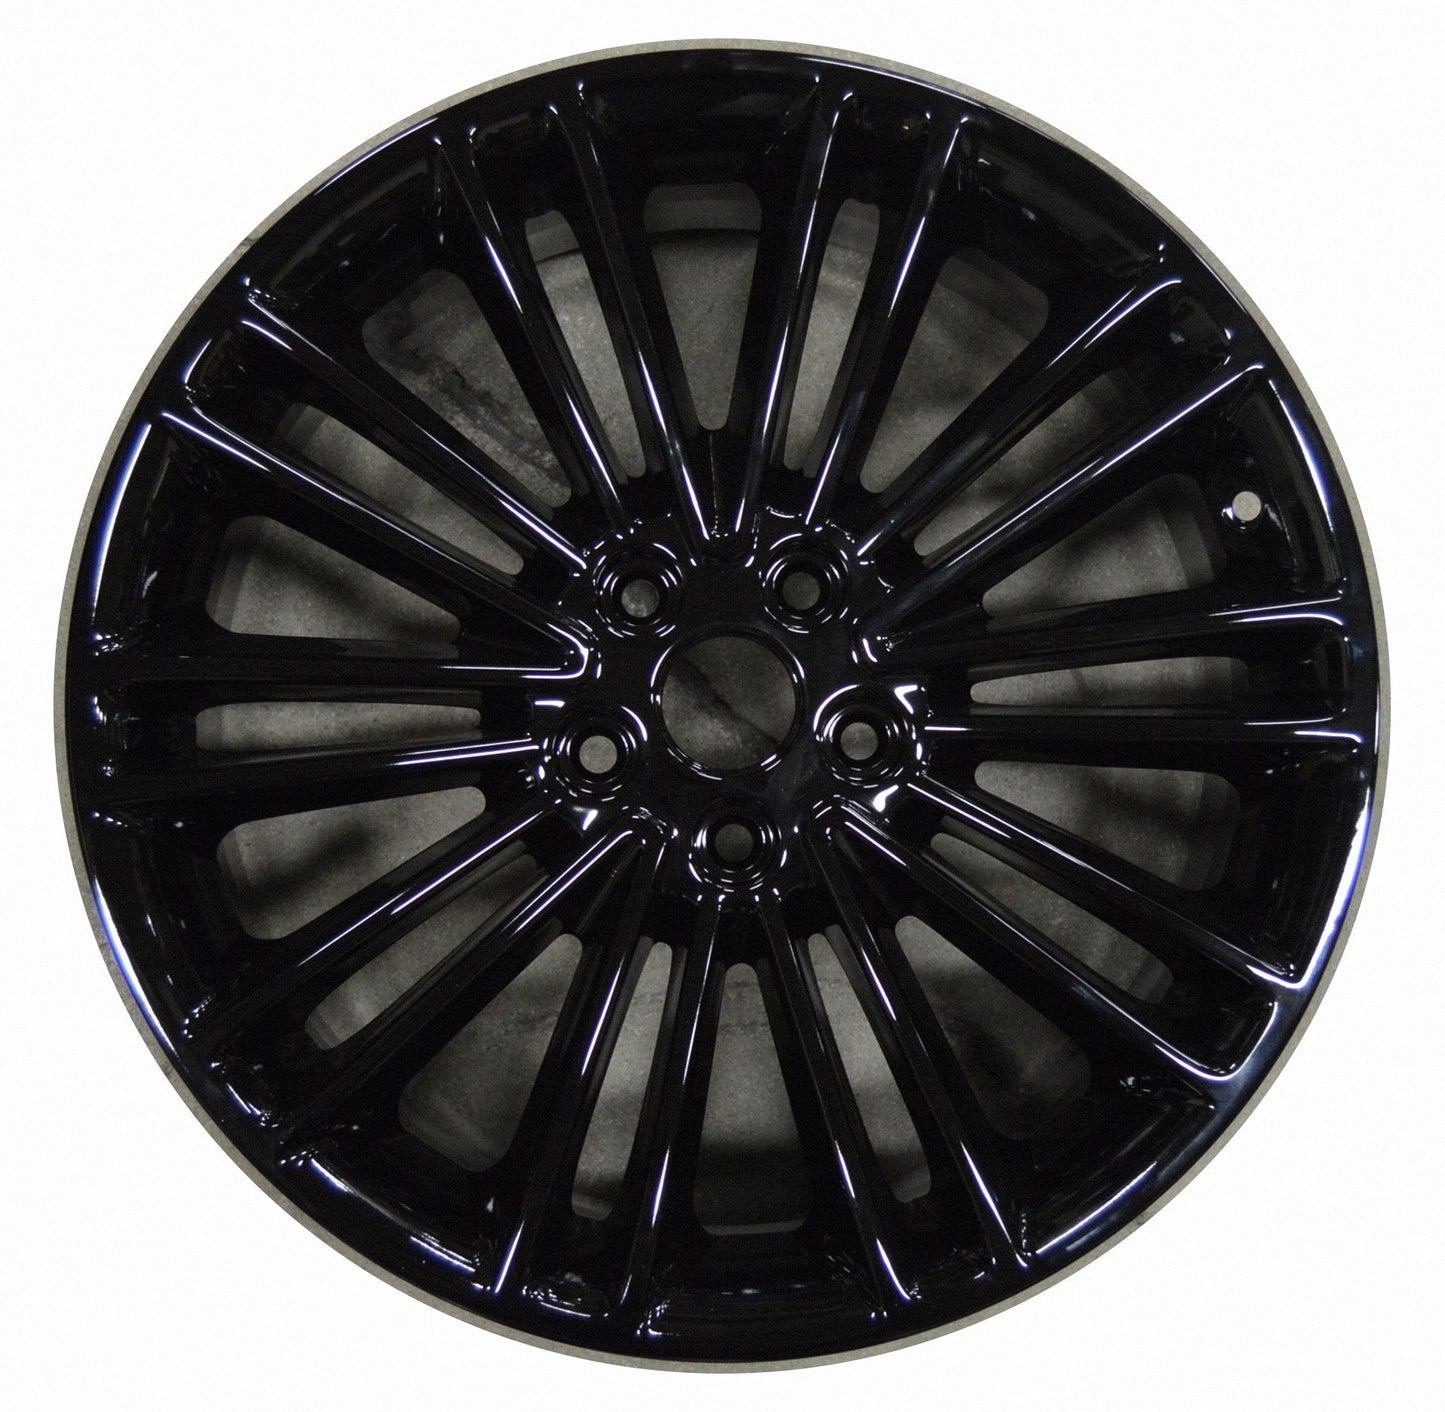 Ford Fusion  2013, 2014, 2015, 2016 Factory OEM Car Wheel Size 18x8 Alloy WAO.3960.PB01.FF